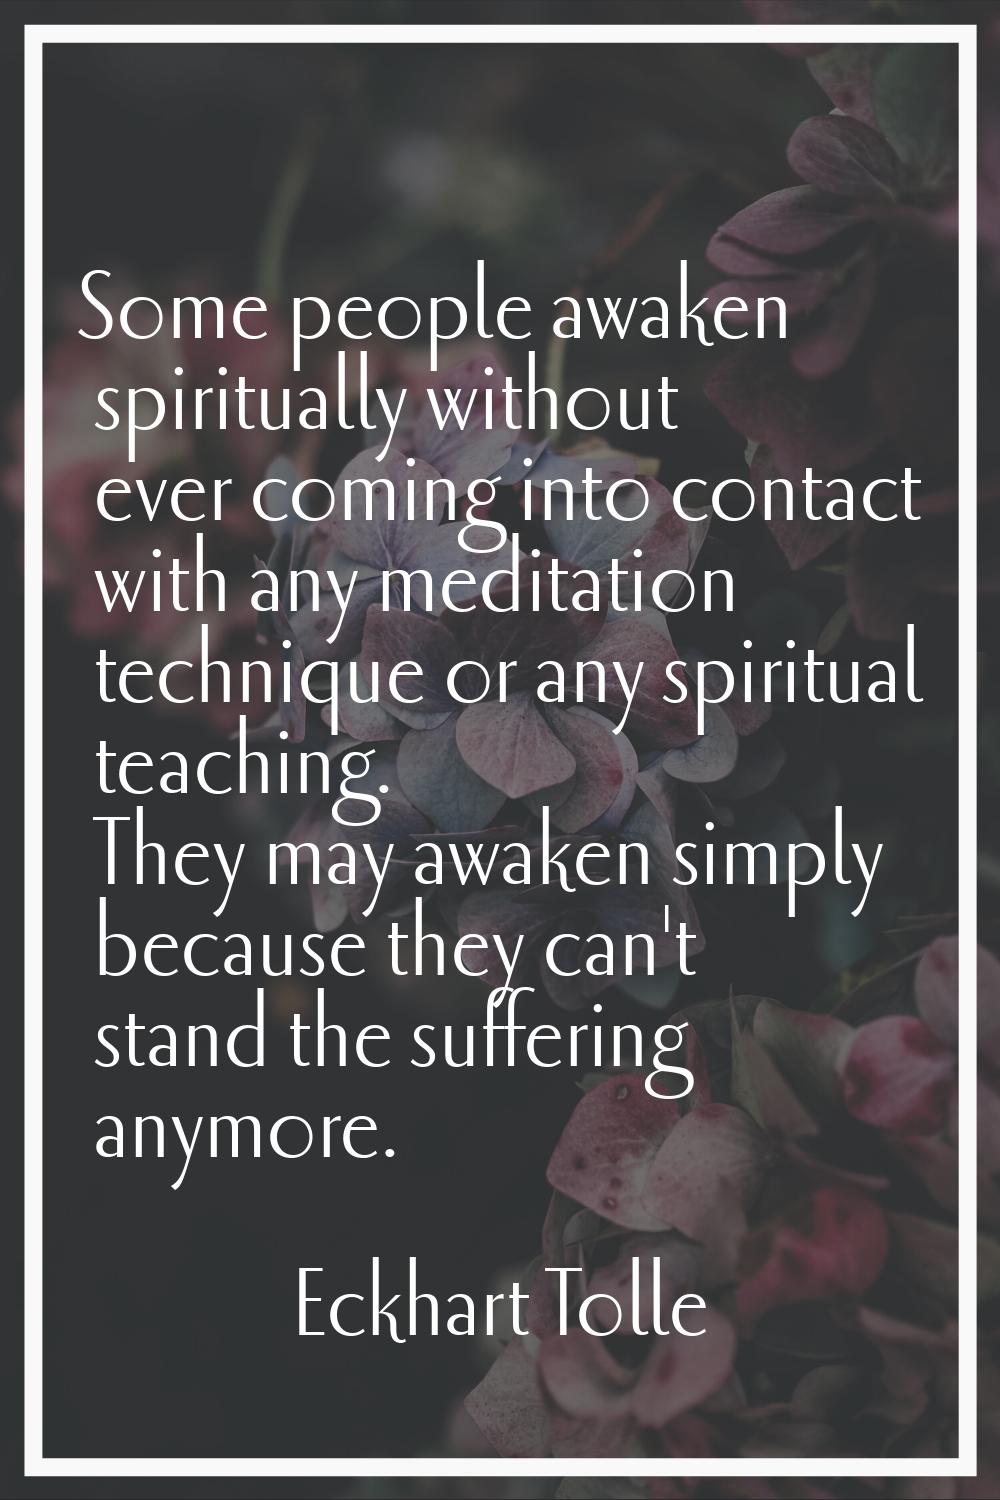 Some people awaken spiritually without ever coming into contact with any meditation technique or an